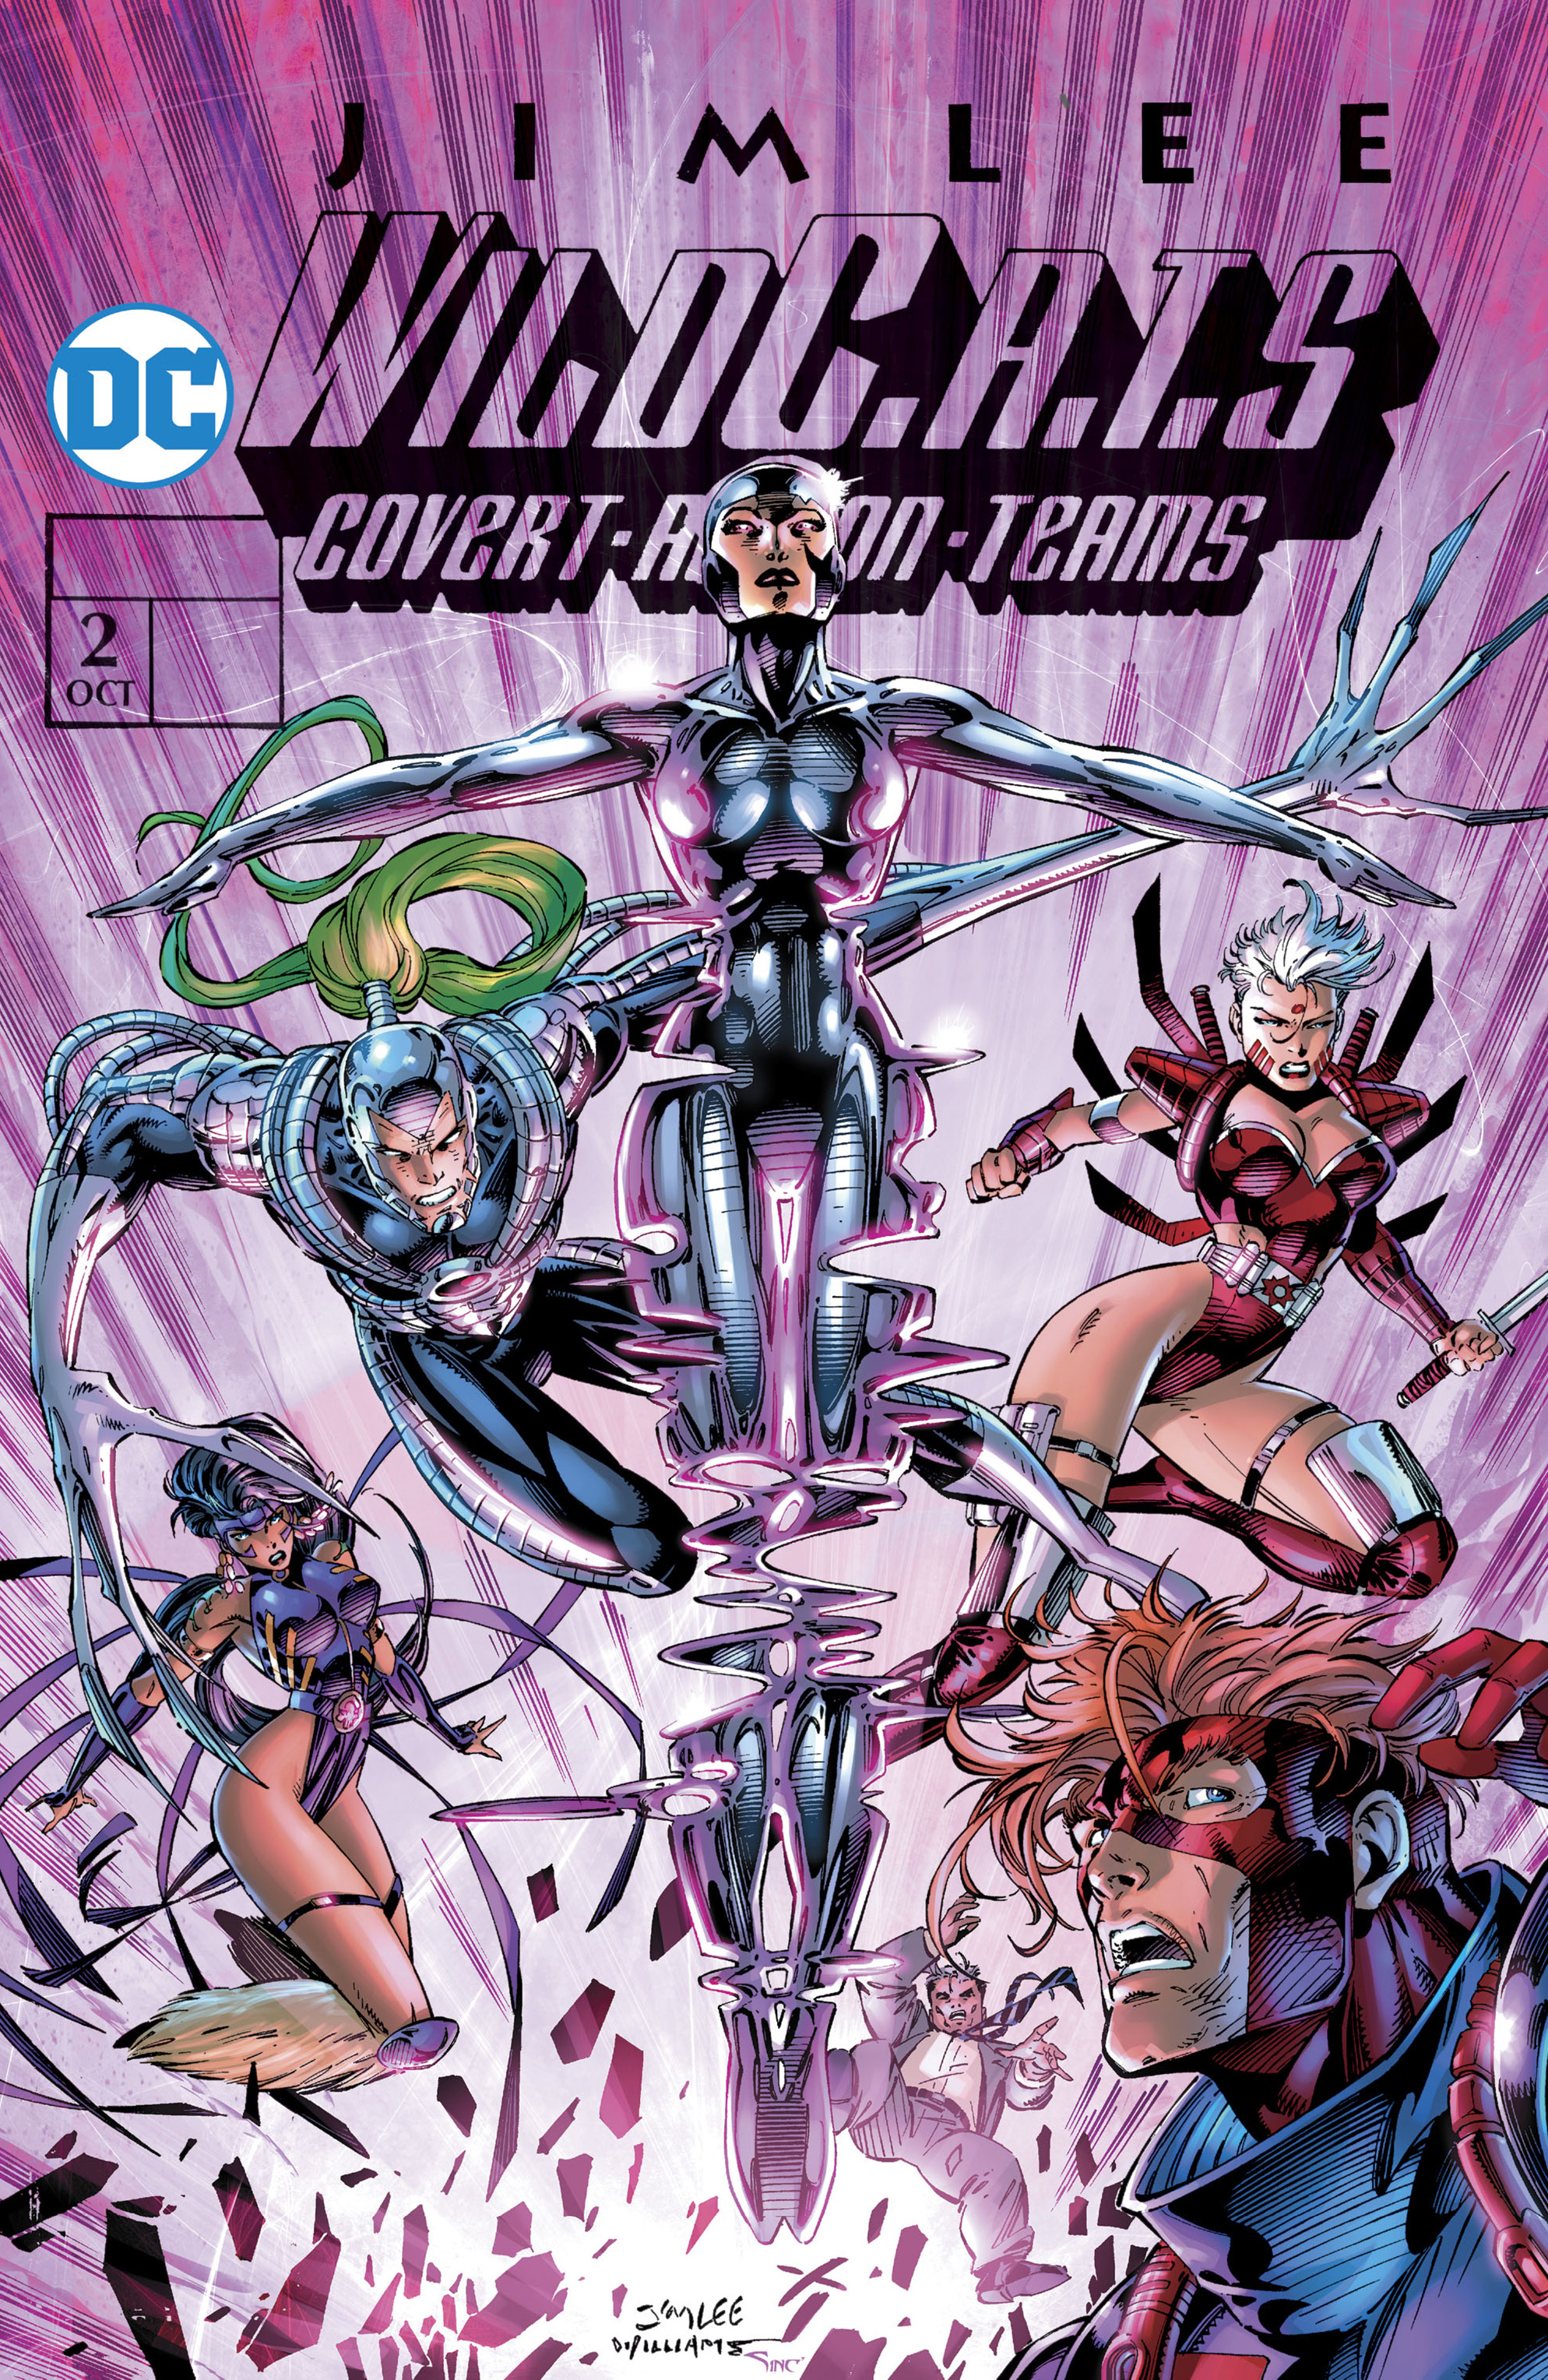 Read online WildC.A.T.s: Covert Action Teams comic -  Issue #2 - 1